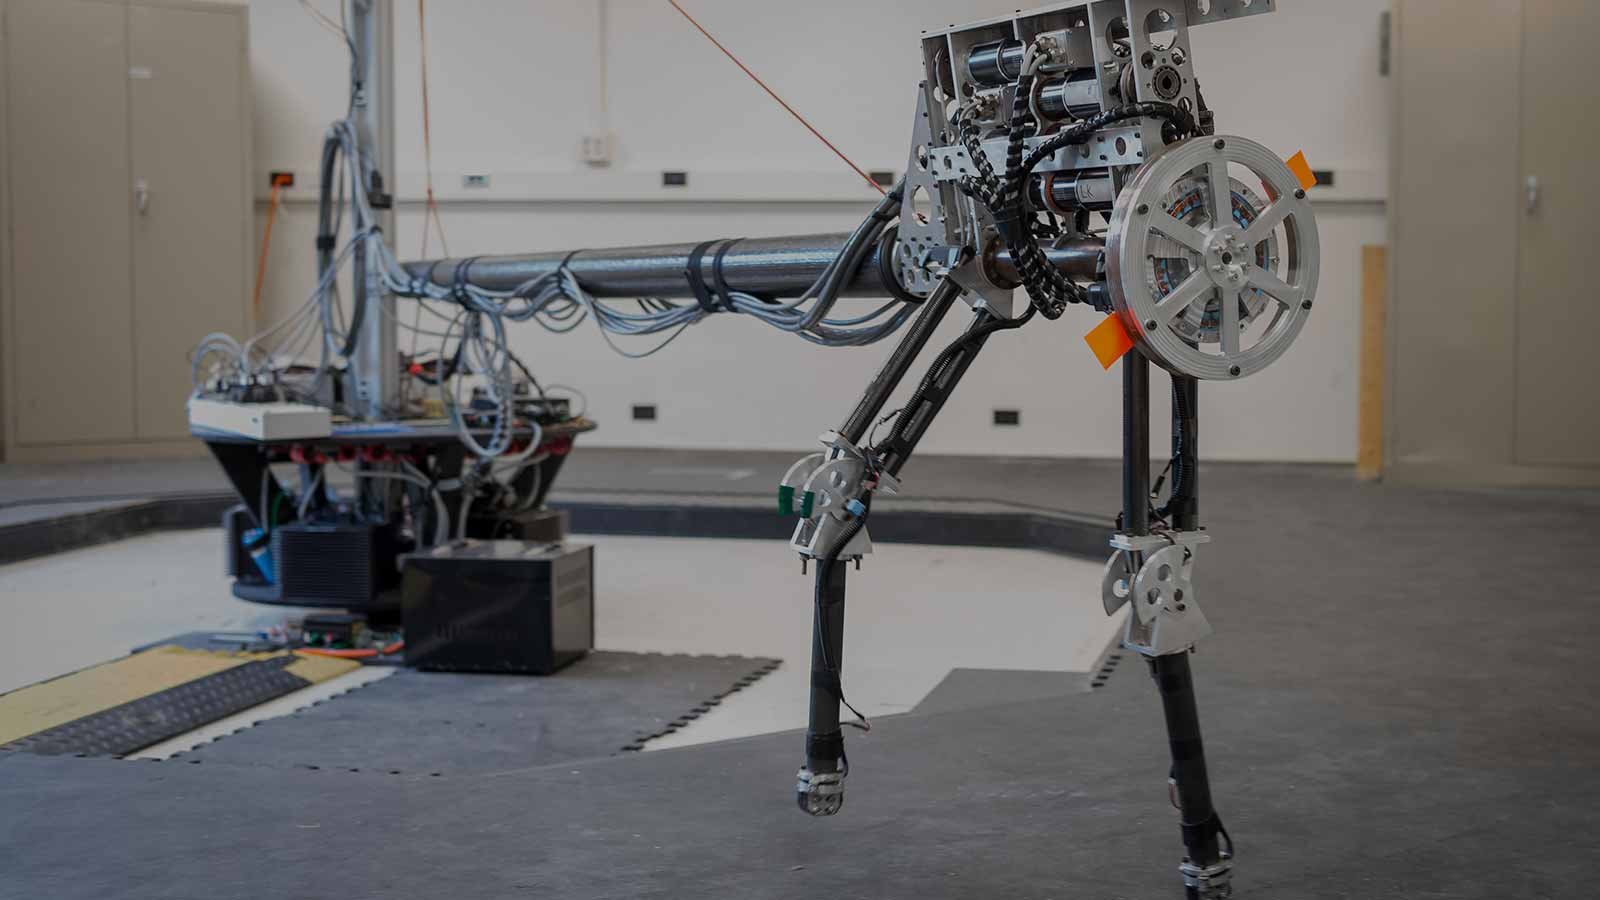 A biped robot used for spinal cord research in Professor Schmiedeler’s laboratory